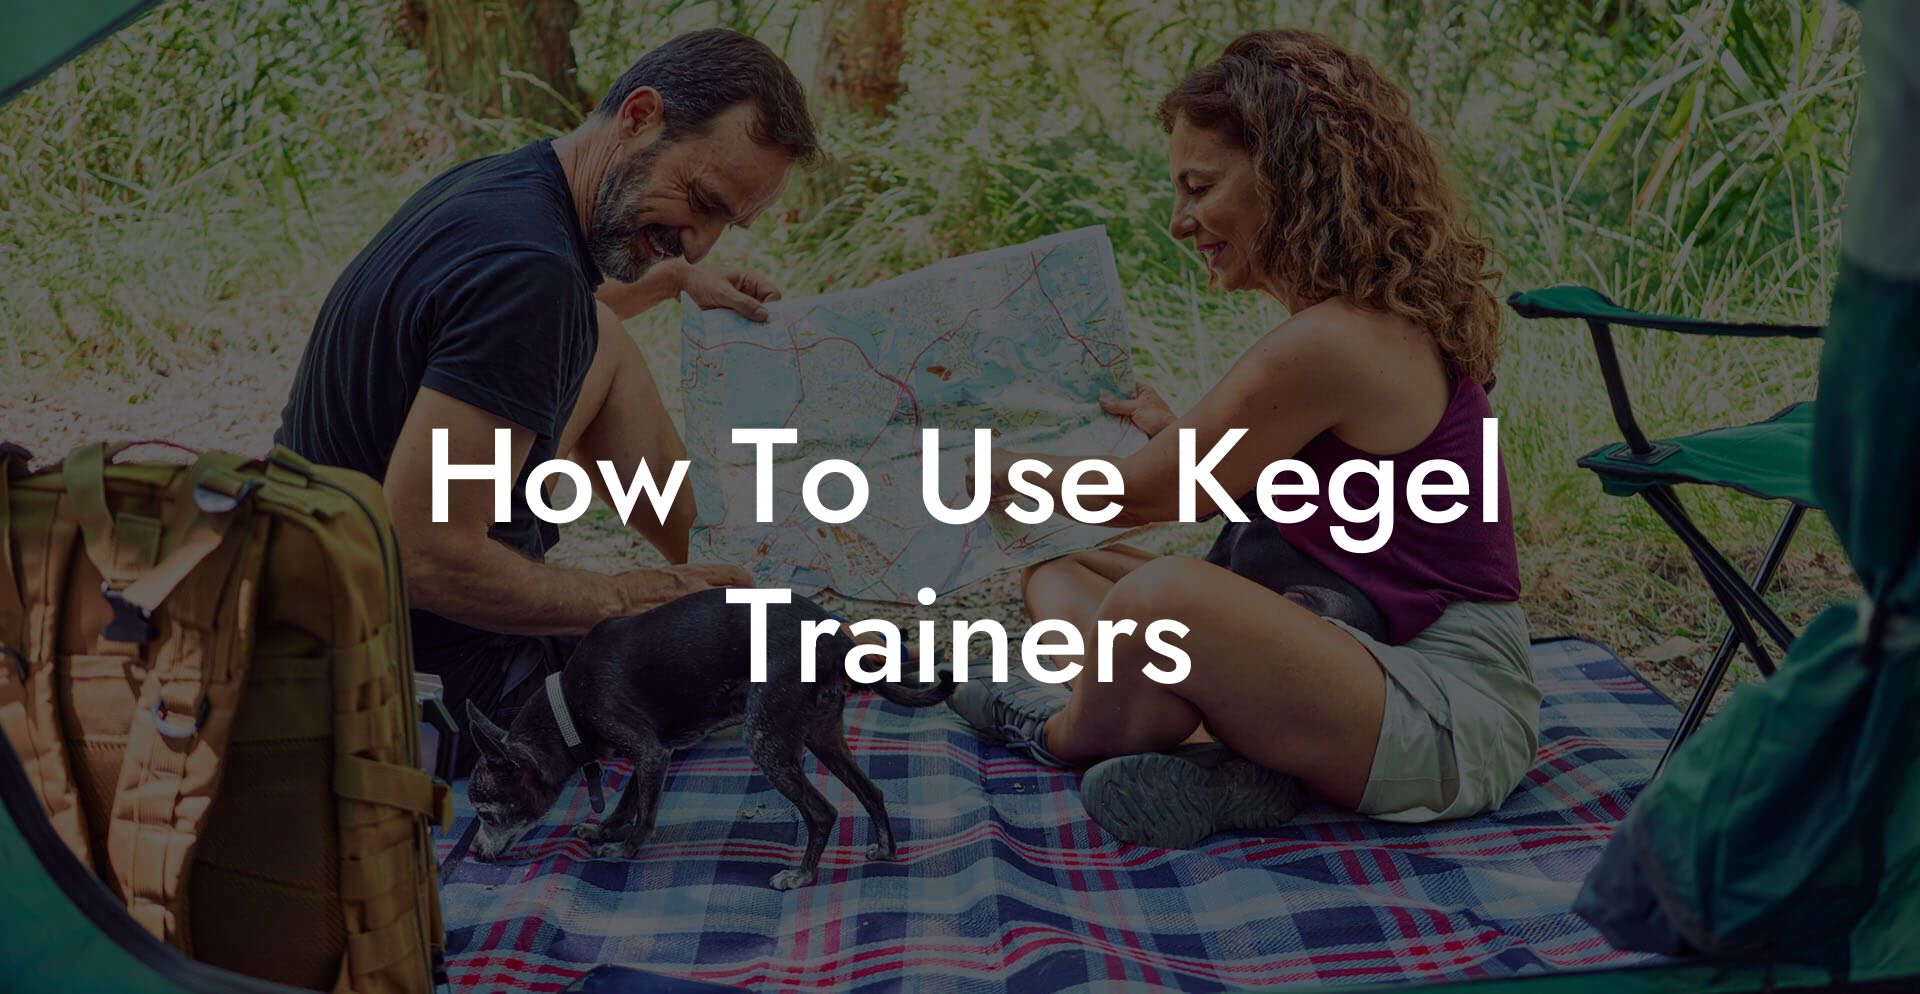 How To Use Kegel Trainers